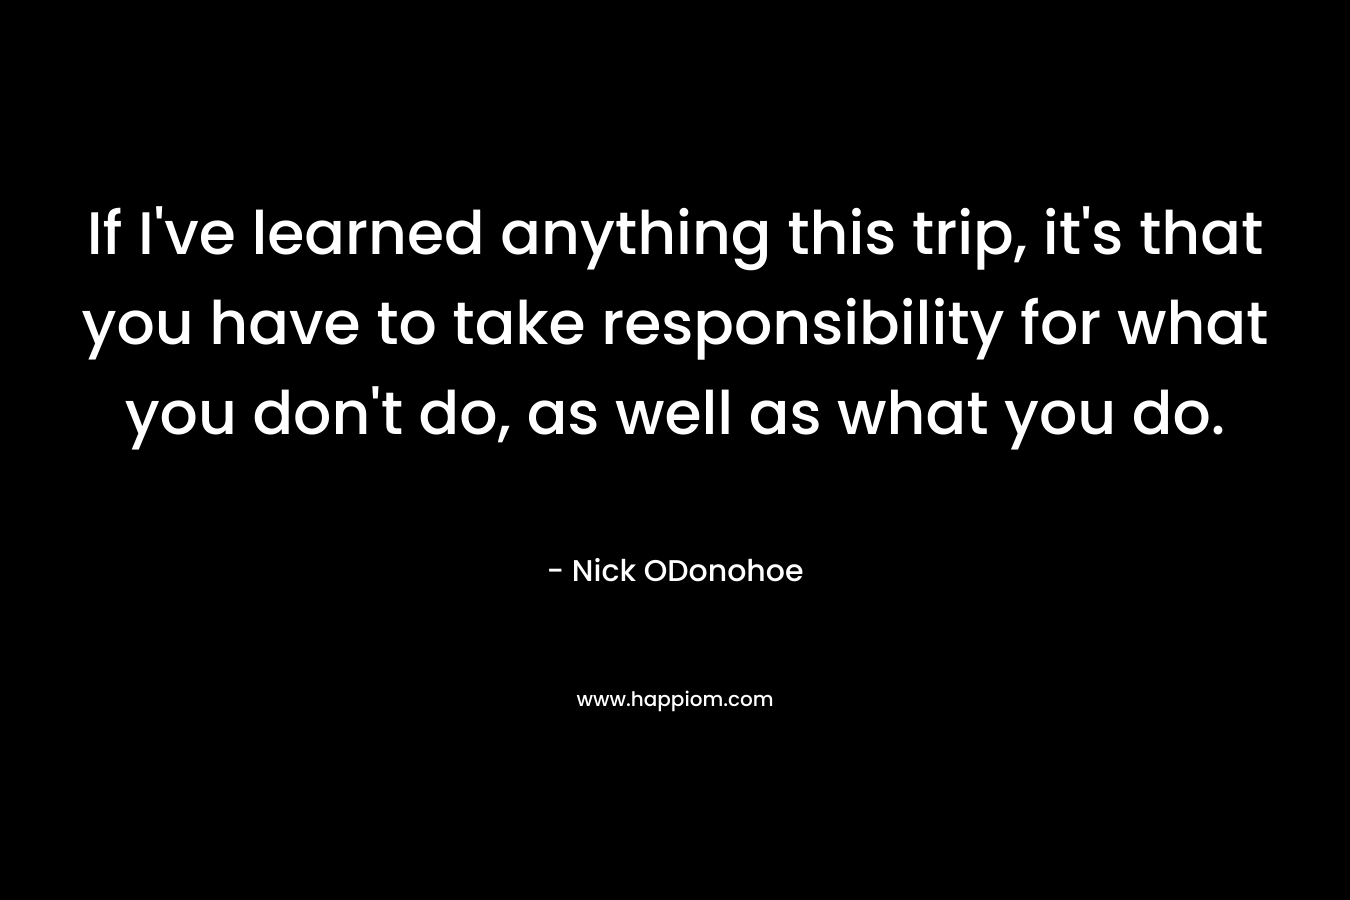 If I've learned anything this trip, it's that you have to take responsibility for what you don't do, as well as what you do.